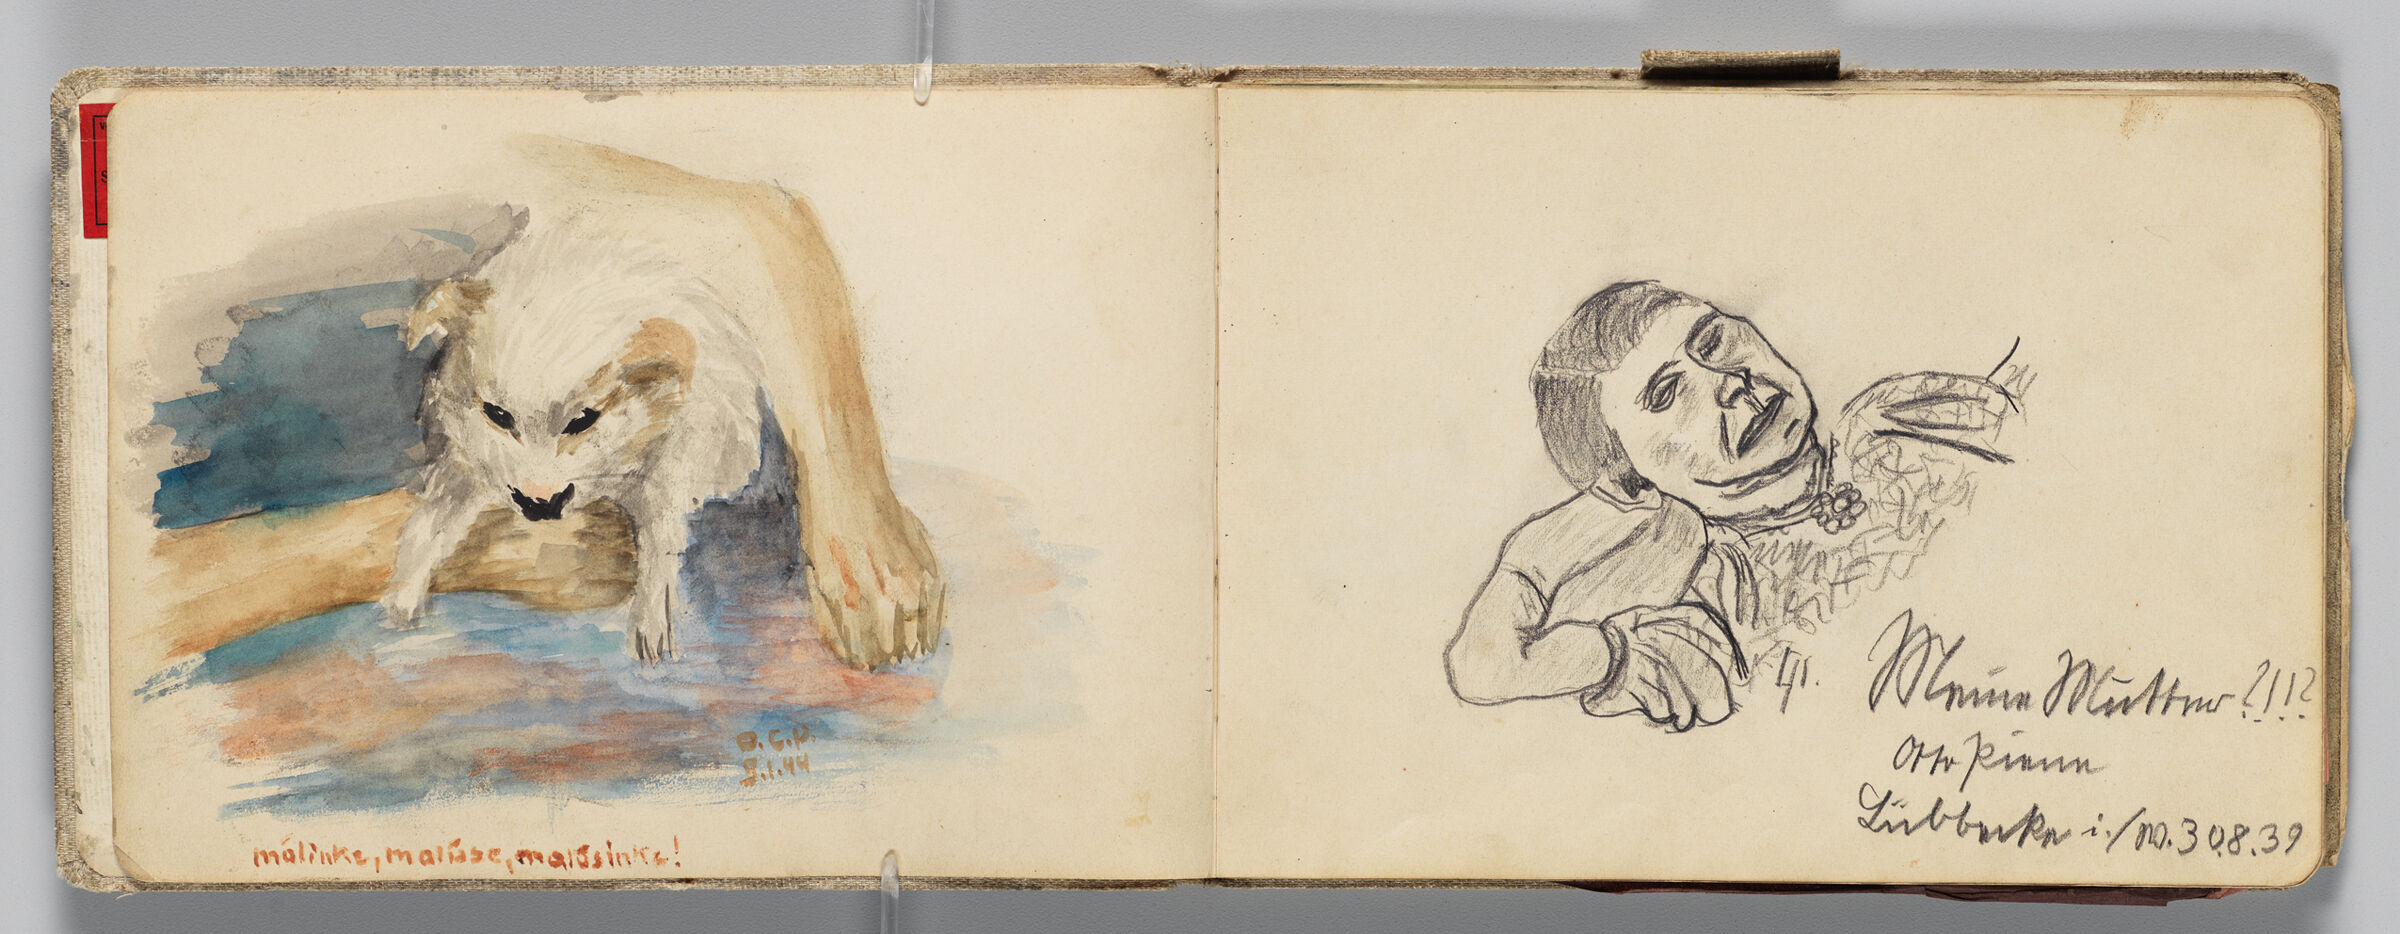 Untitled (Sketch Of Small Animal, Left Page); Untitled (Portrait Of Female Figure [Artist's Mother], Right Page)